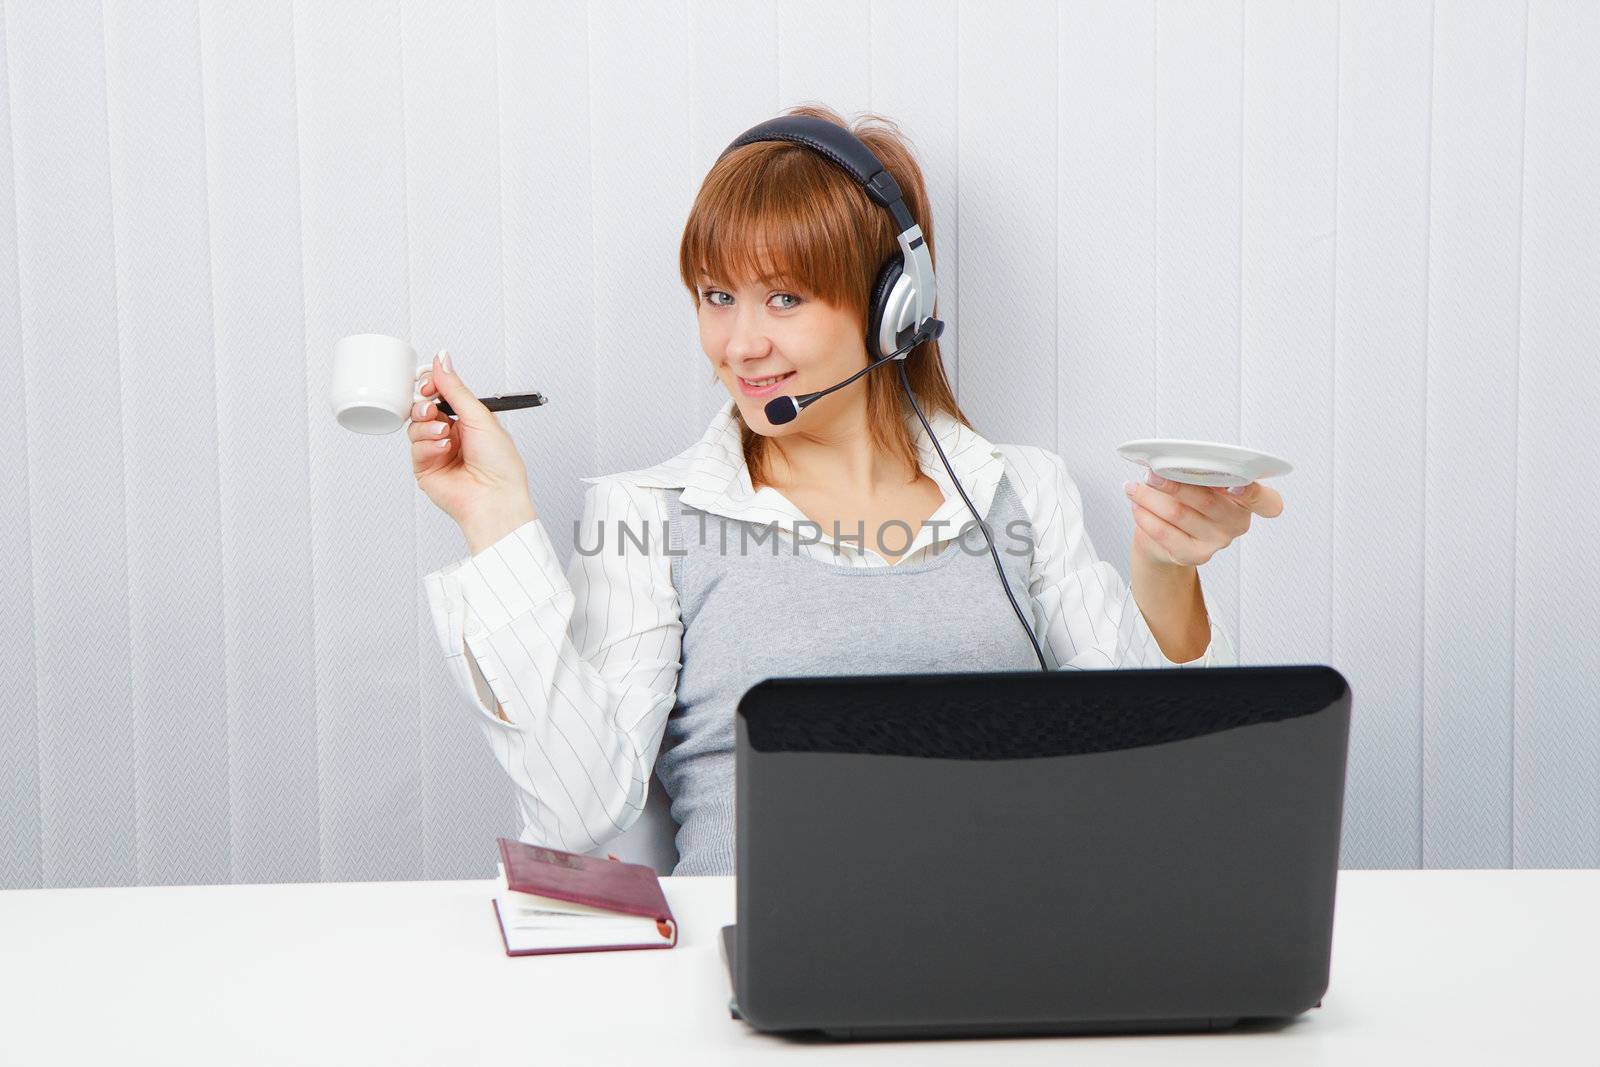 Employee assistance services online. Girl in a playful mood